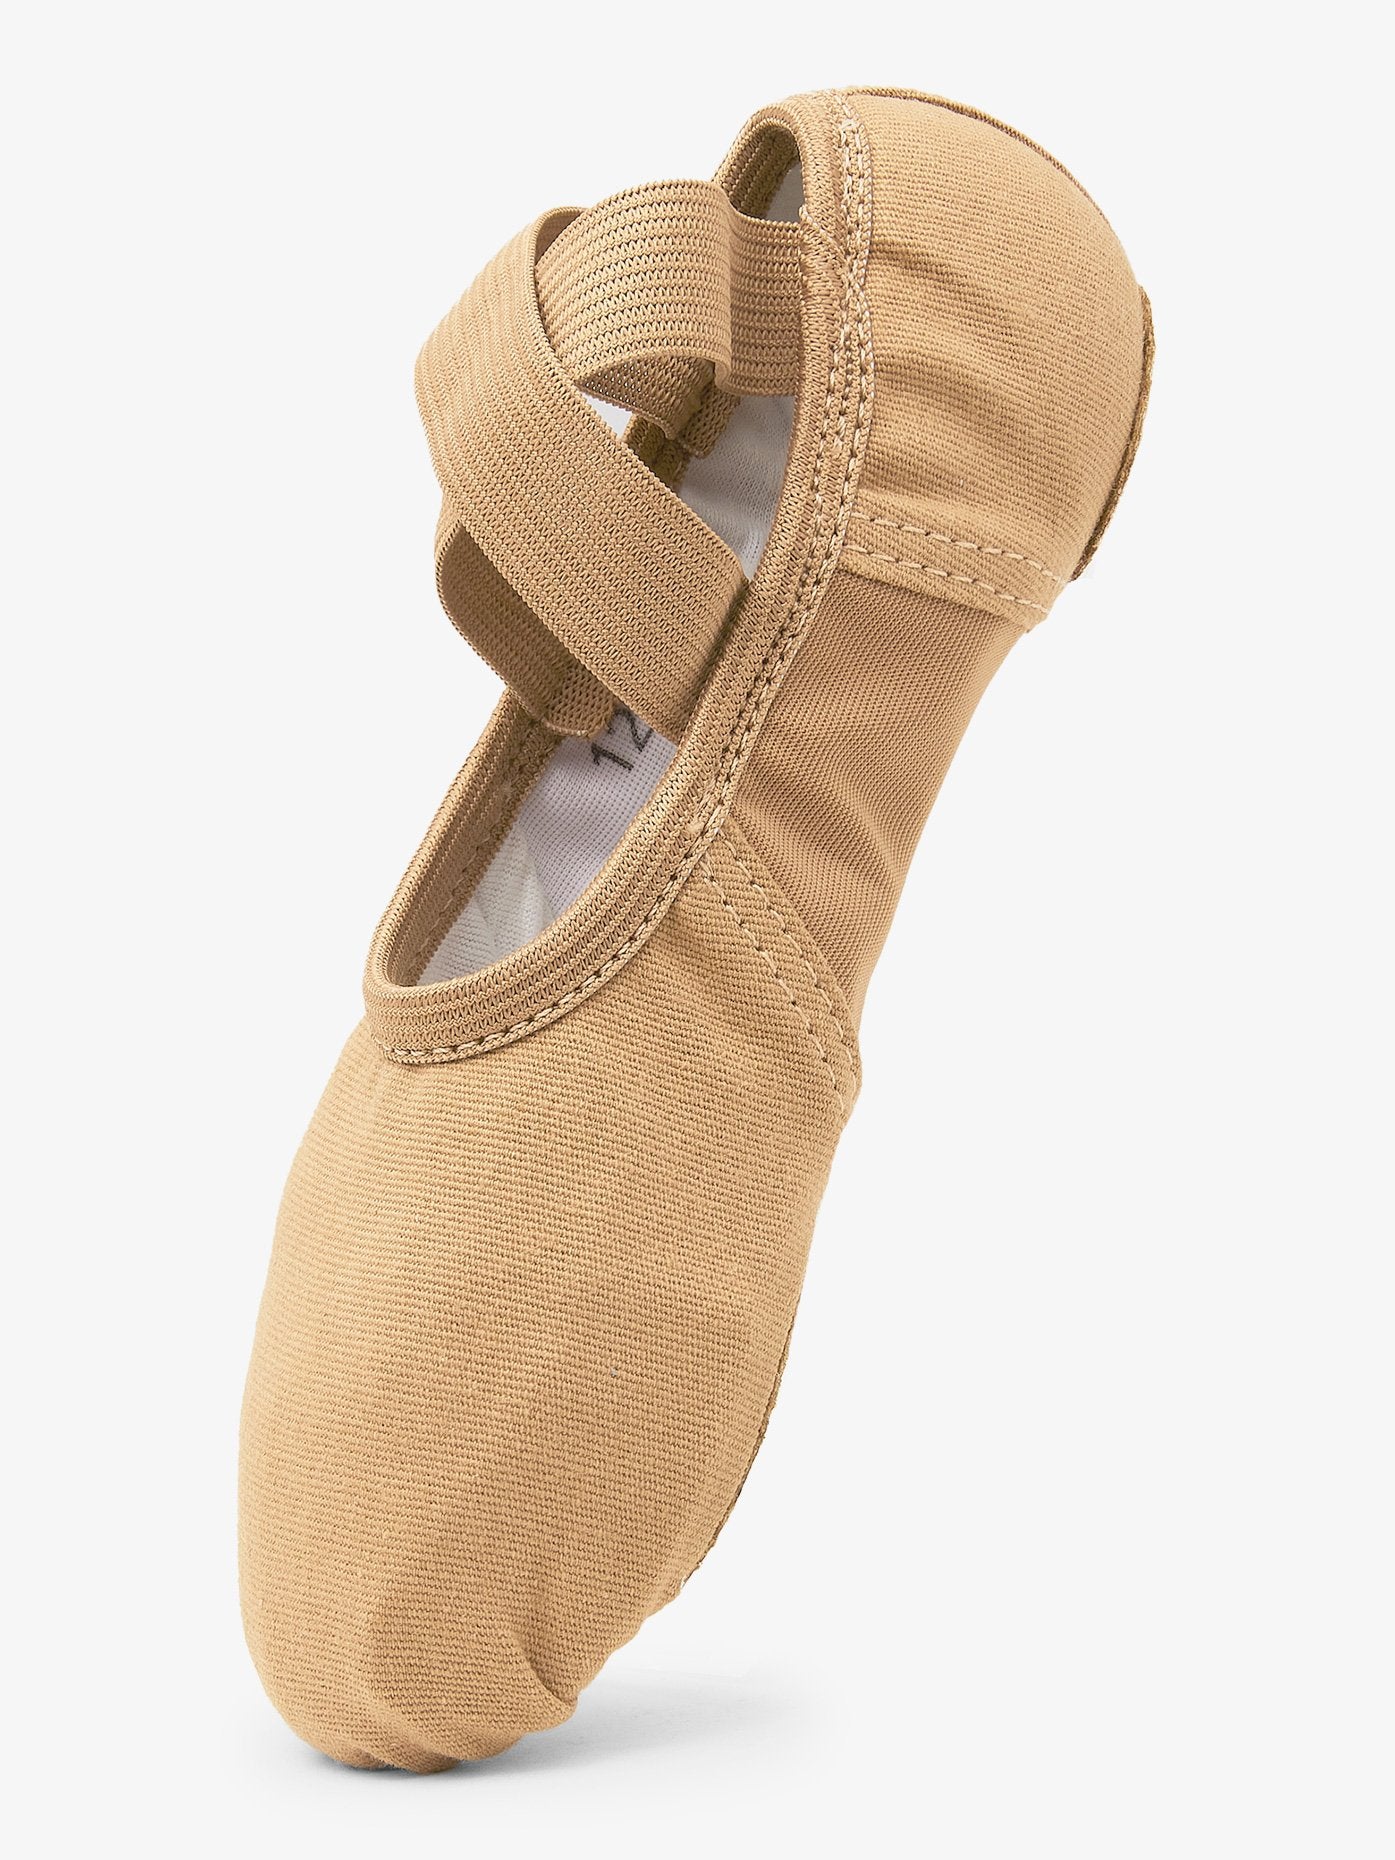 Women's canvas tan ballet shoes with nylon spandex insert and split sole for optimal flexibility and comfort